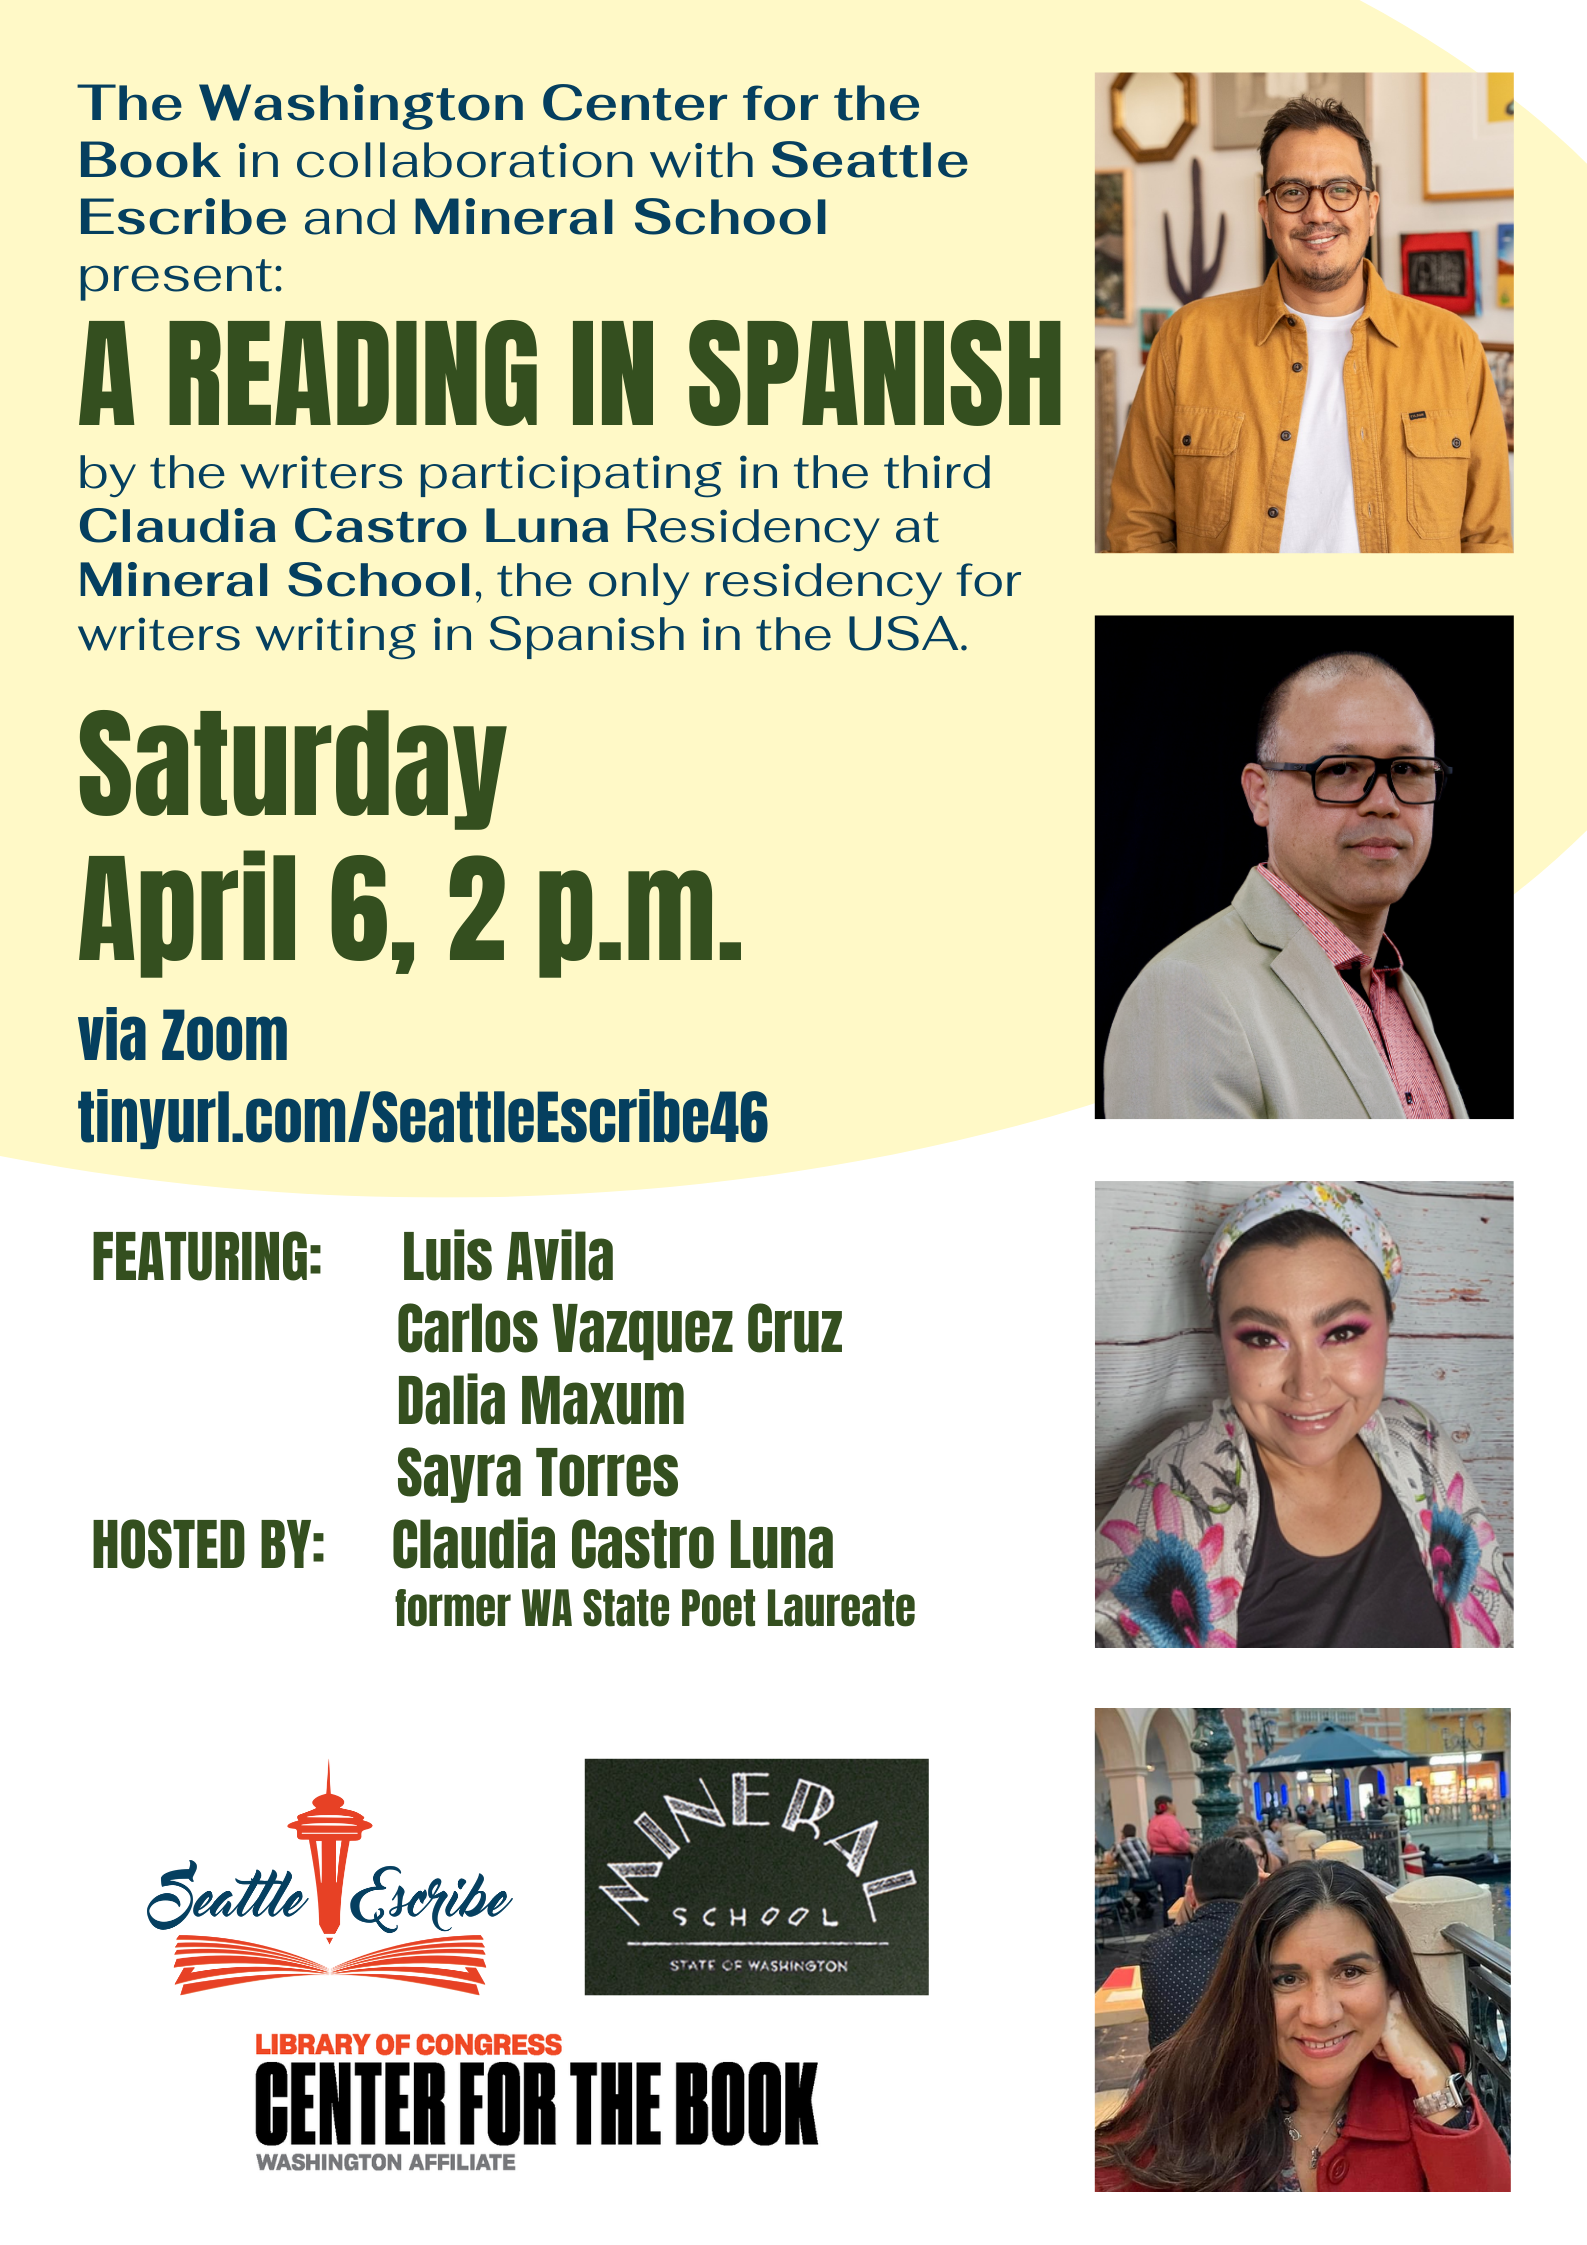 The Washington Center for the Book in collaboration with Seattle Escribe and Mineral School present: A Reading in Spanish by the writers participating in the third Claudia Castro Luna Residency at Mineral School, the only residency for writers writing in Spanish in the USA. FEATURING: Luis Avila Carlos Vazquez Cruz Dalia Maxum Sayra Torres HOSTED BY: Claudia Castro Luna This event will be in Spanish.